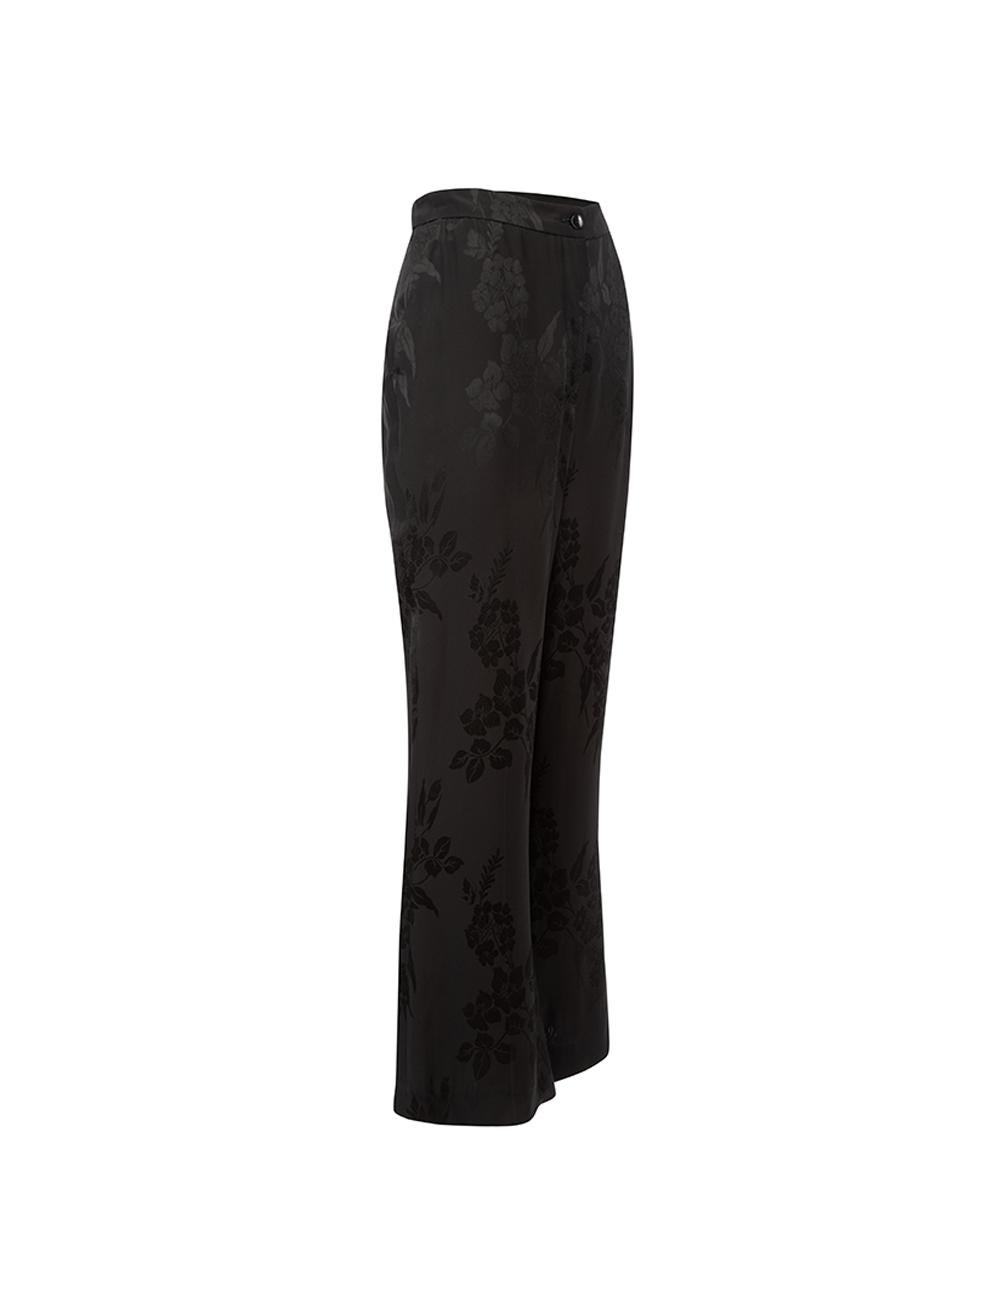 CONDITION is Very good. Minimal wear to trousers is evident. Minimal wear to rear-right leg above the cuff with small marking on this used Etro designer resale item.



Details


Black

Viscose

Straight leg trousers

High rise

Floral pattern

High